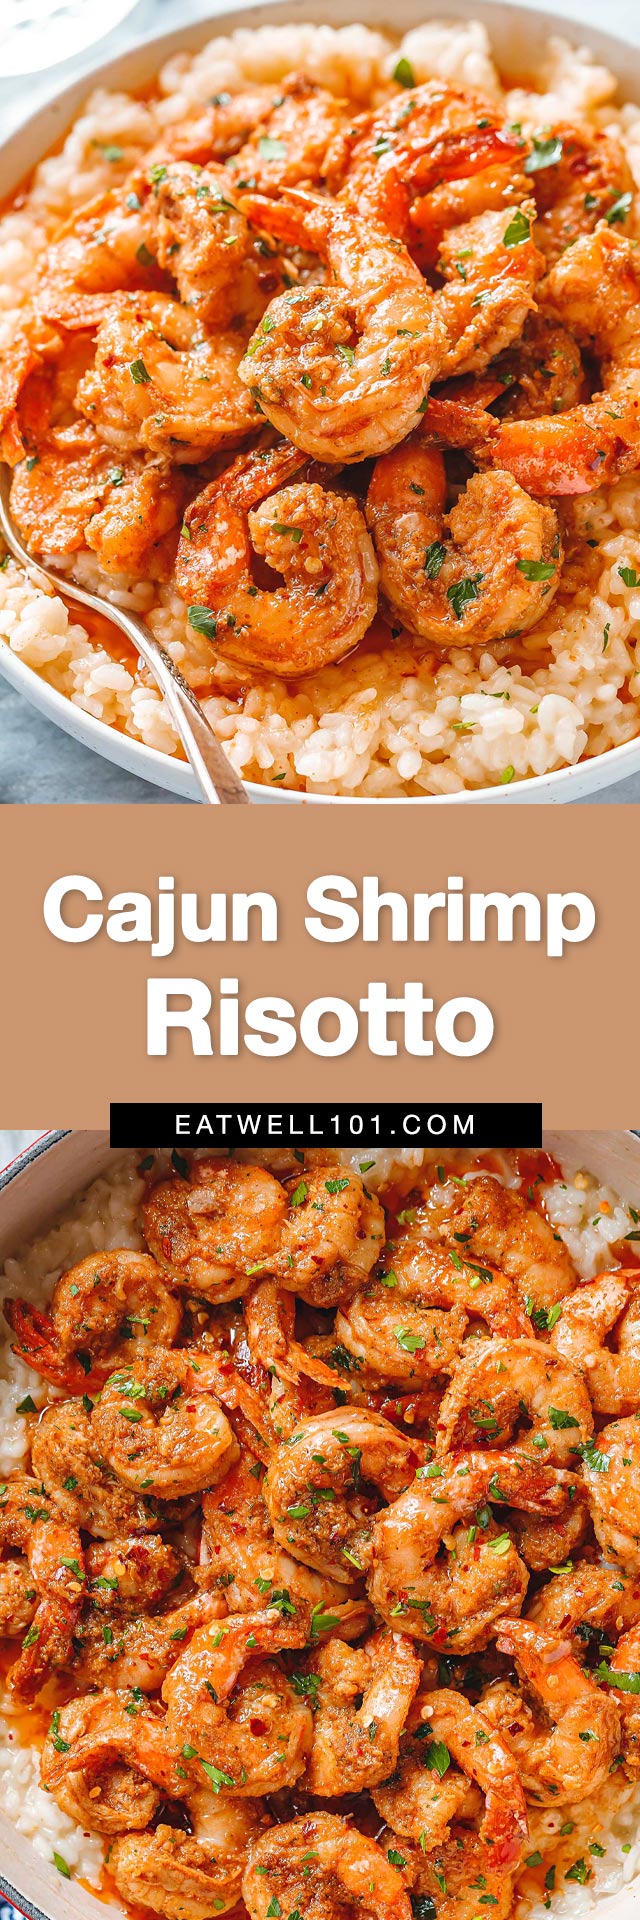 Cajun Shrimp Risotto - #cajun #risotto #shrimp #recipe #eatwell101 - Our easy Cajun shrimp risotto recipe is so rich and flavorful you’ll want to find any excuse to make it again and again! CLICK HERE to get The recipe